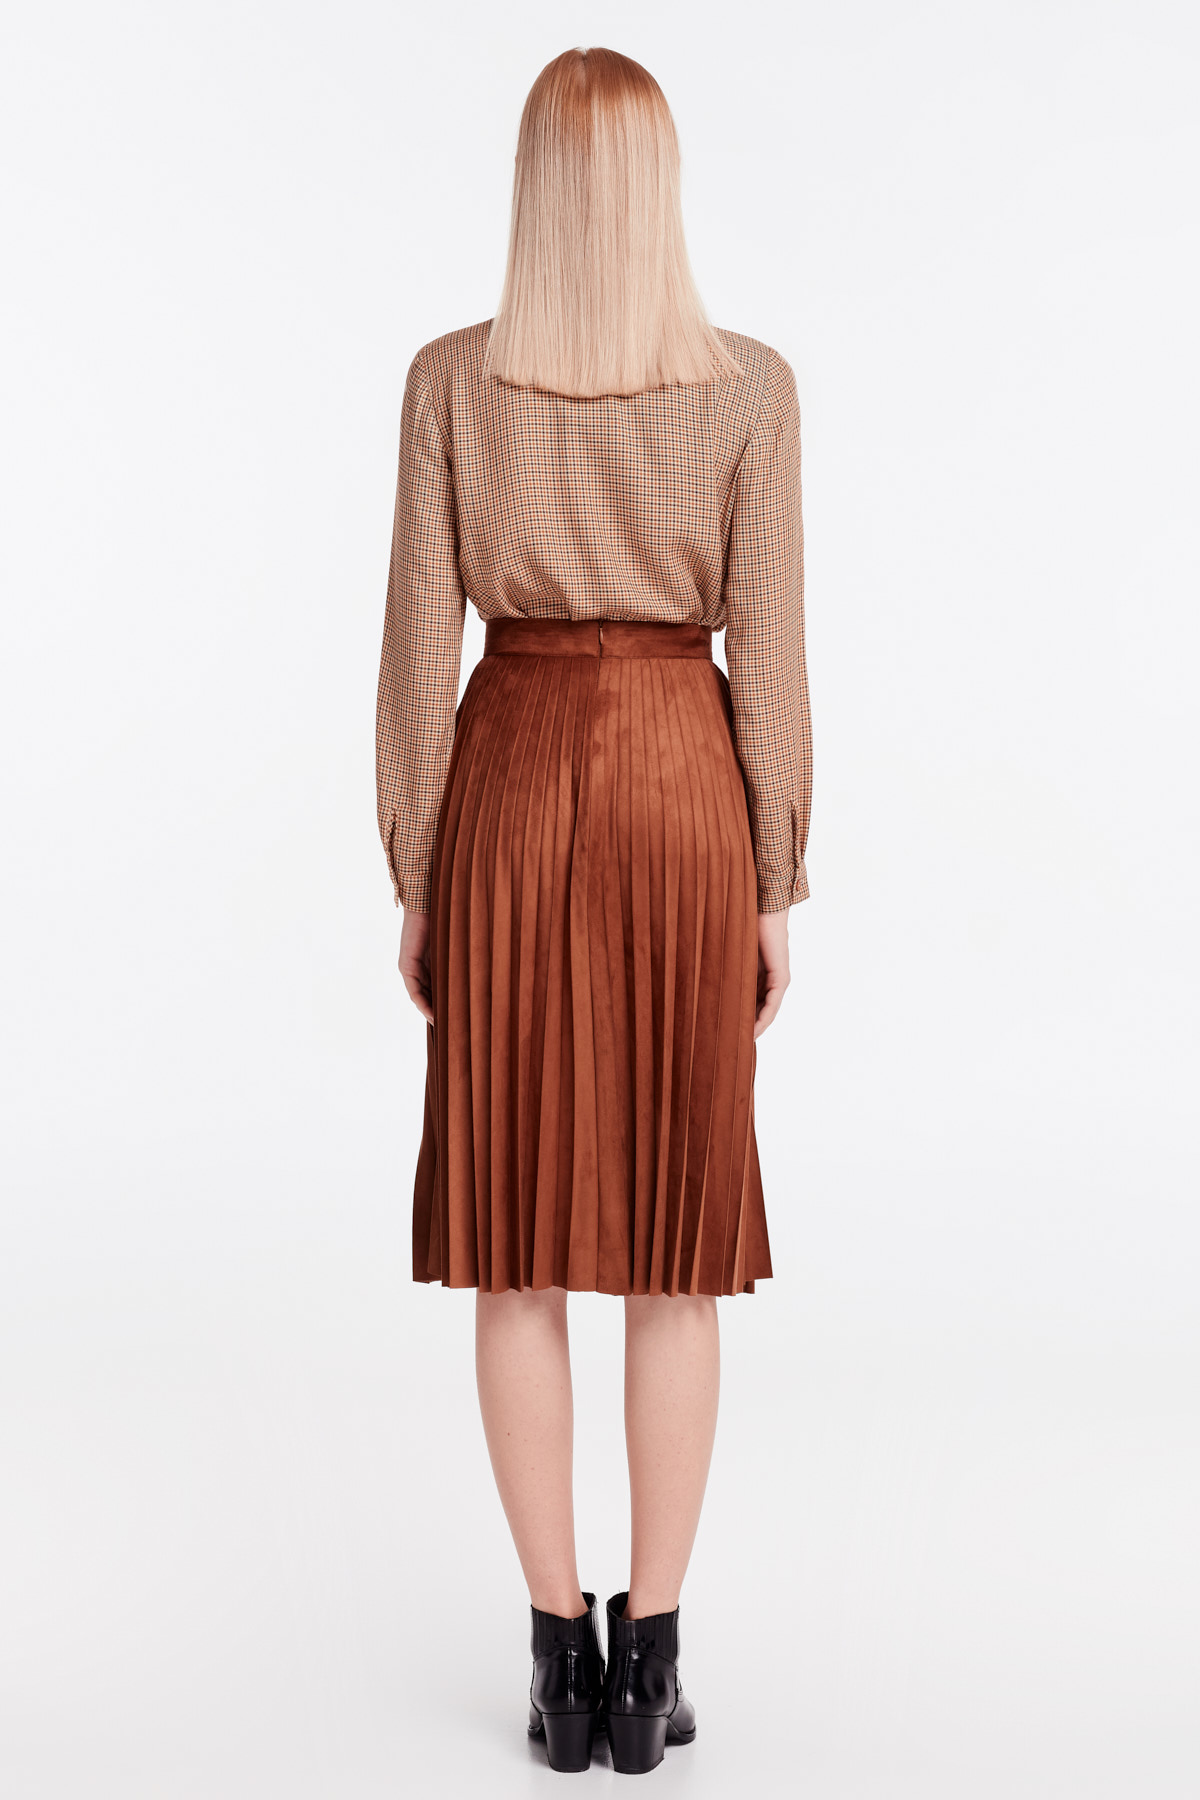 Brown suede pleated skirt, photo 9